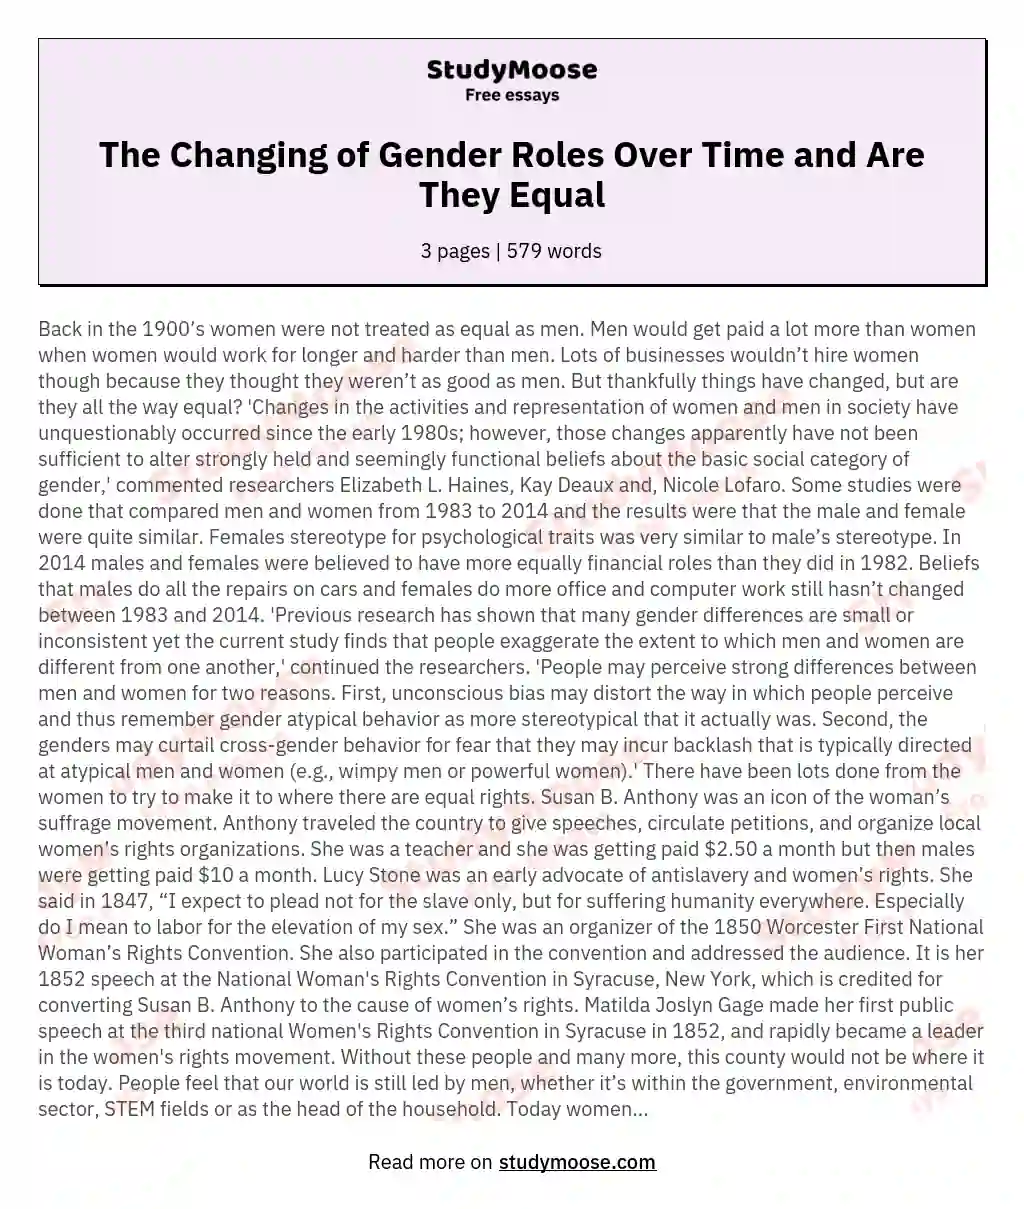 The Changing of Gender Roles Over Time and Are They Equal essay